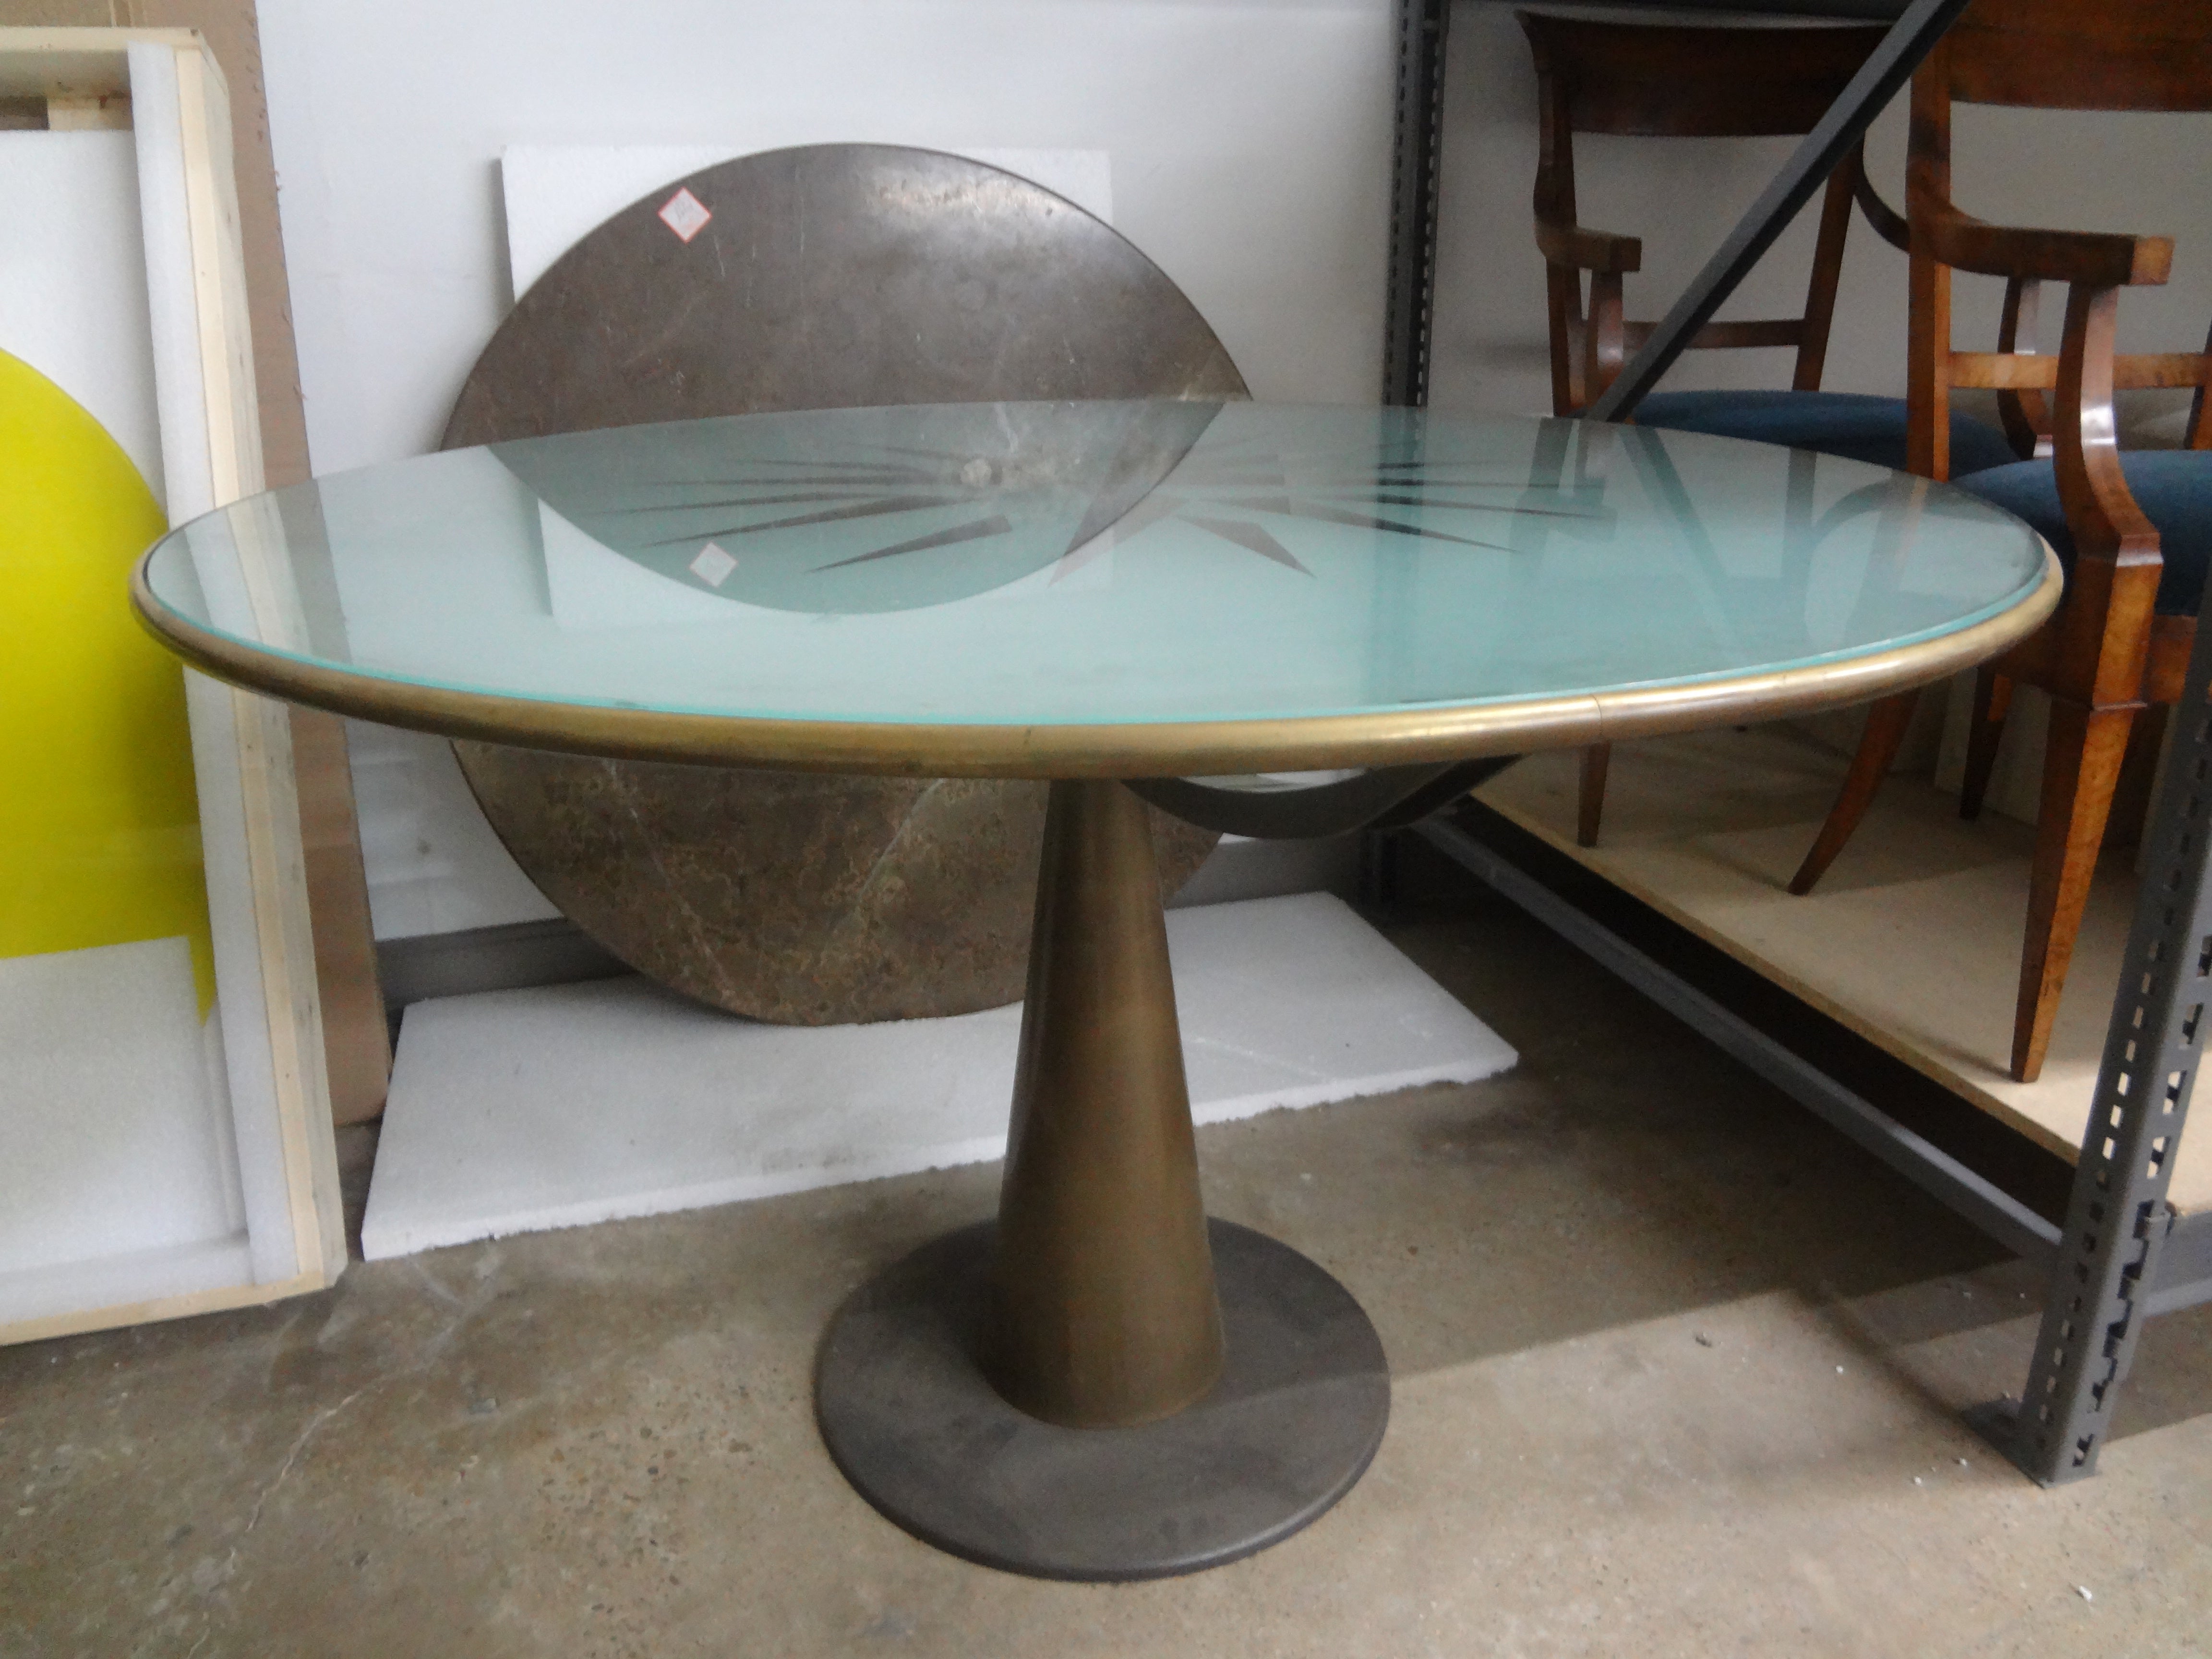 Italian Modern Center Table By Oscar Tusquets.
We offer this iconic Italian modern Oscar Tusquets Astrolabio for Aleph-Driade Center Table or dining table.
This table was designed by Catalan designer Oscar Tusquets for Aleph. The base is made out of